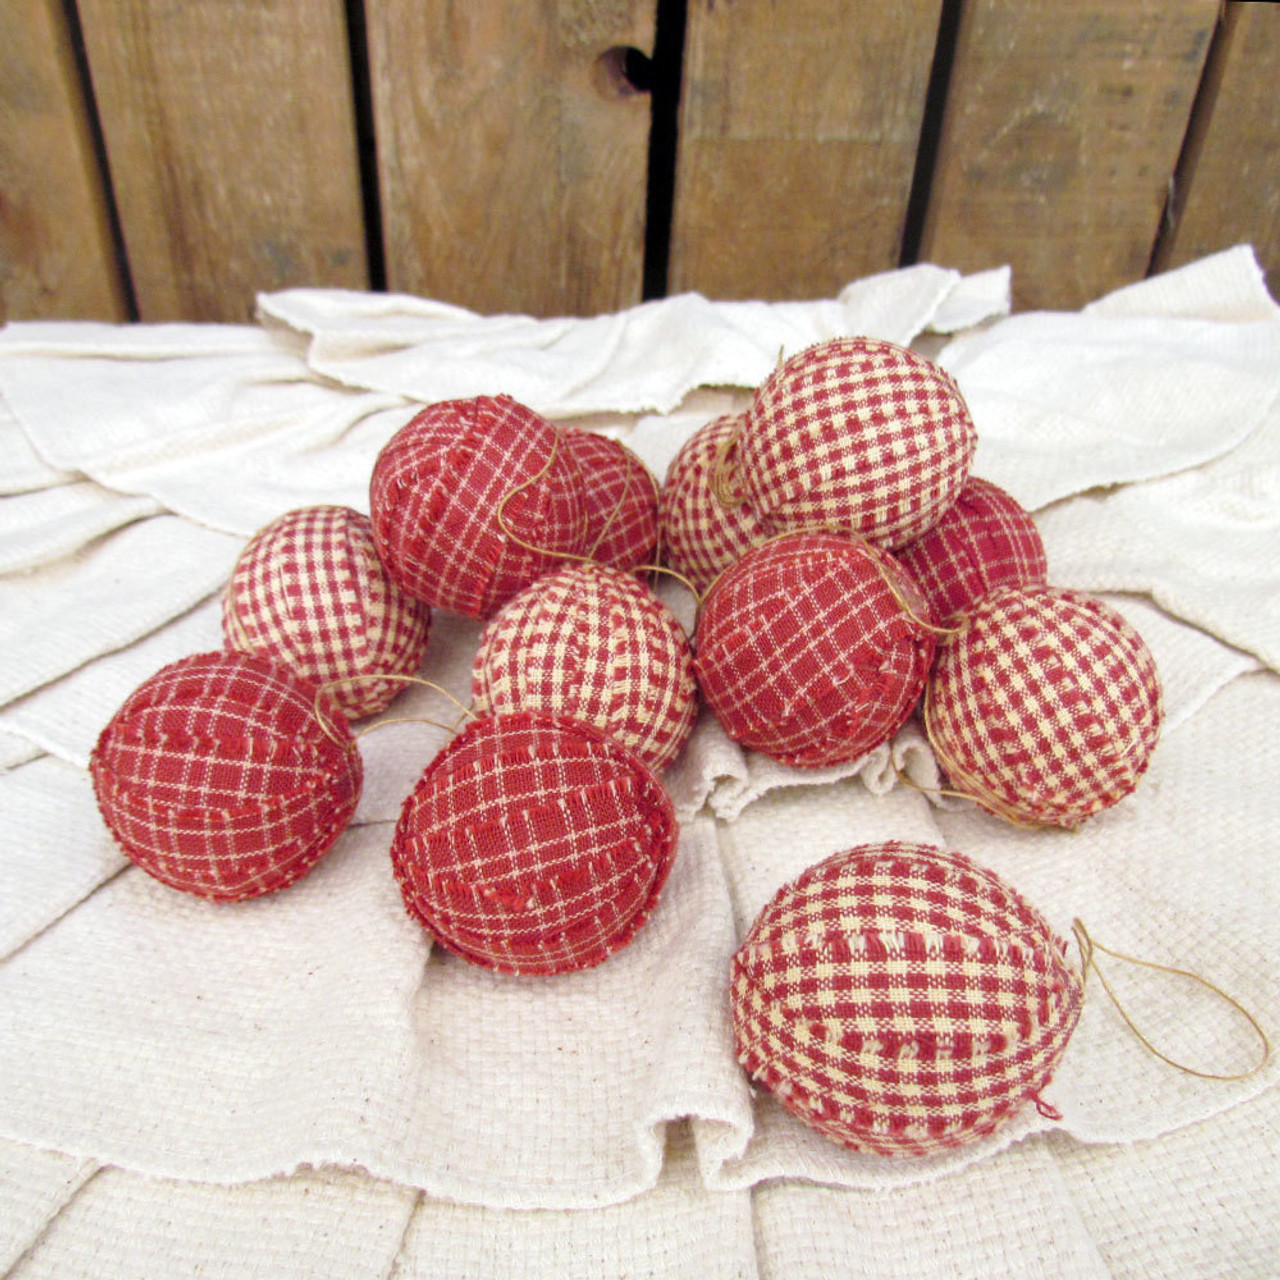 Primitive Red Plaid Homespun Christmas Ball Ornaments Set of 12 by Marilee Home